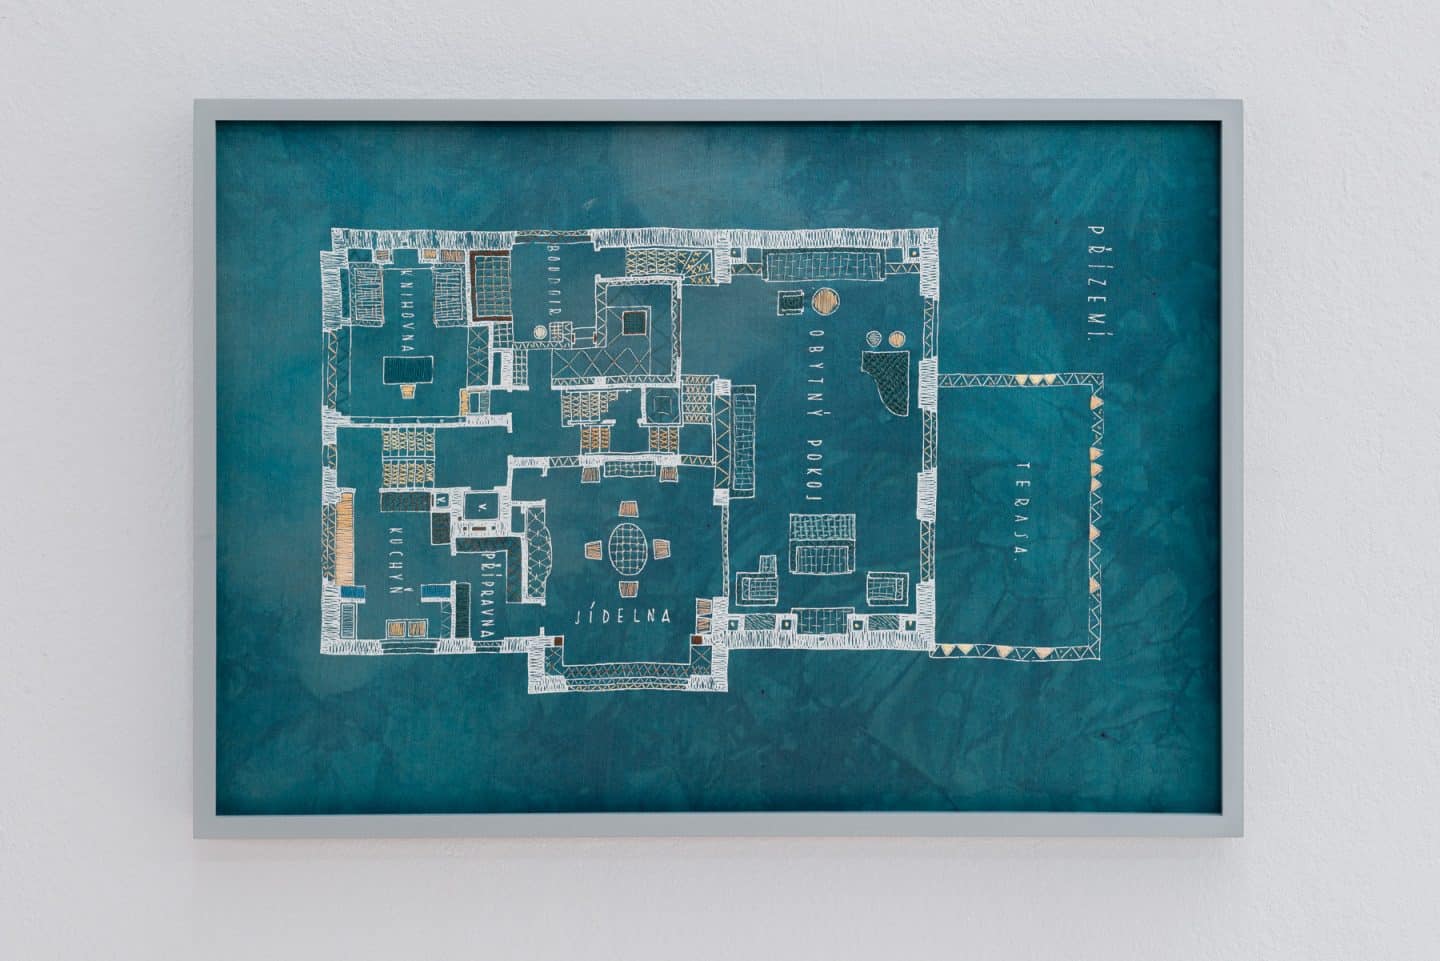 Shannon Bool, Villa Muller Sampler, 2019, silkscreen, cotton embroidery on hand dyed silk. Collection of the artist, courtesy of the Daniel Faria Gallery, Toronto, and Gallery Kadel Willborn, Düsseldorf